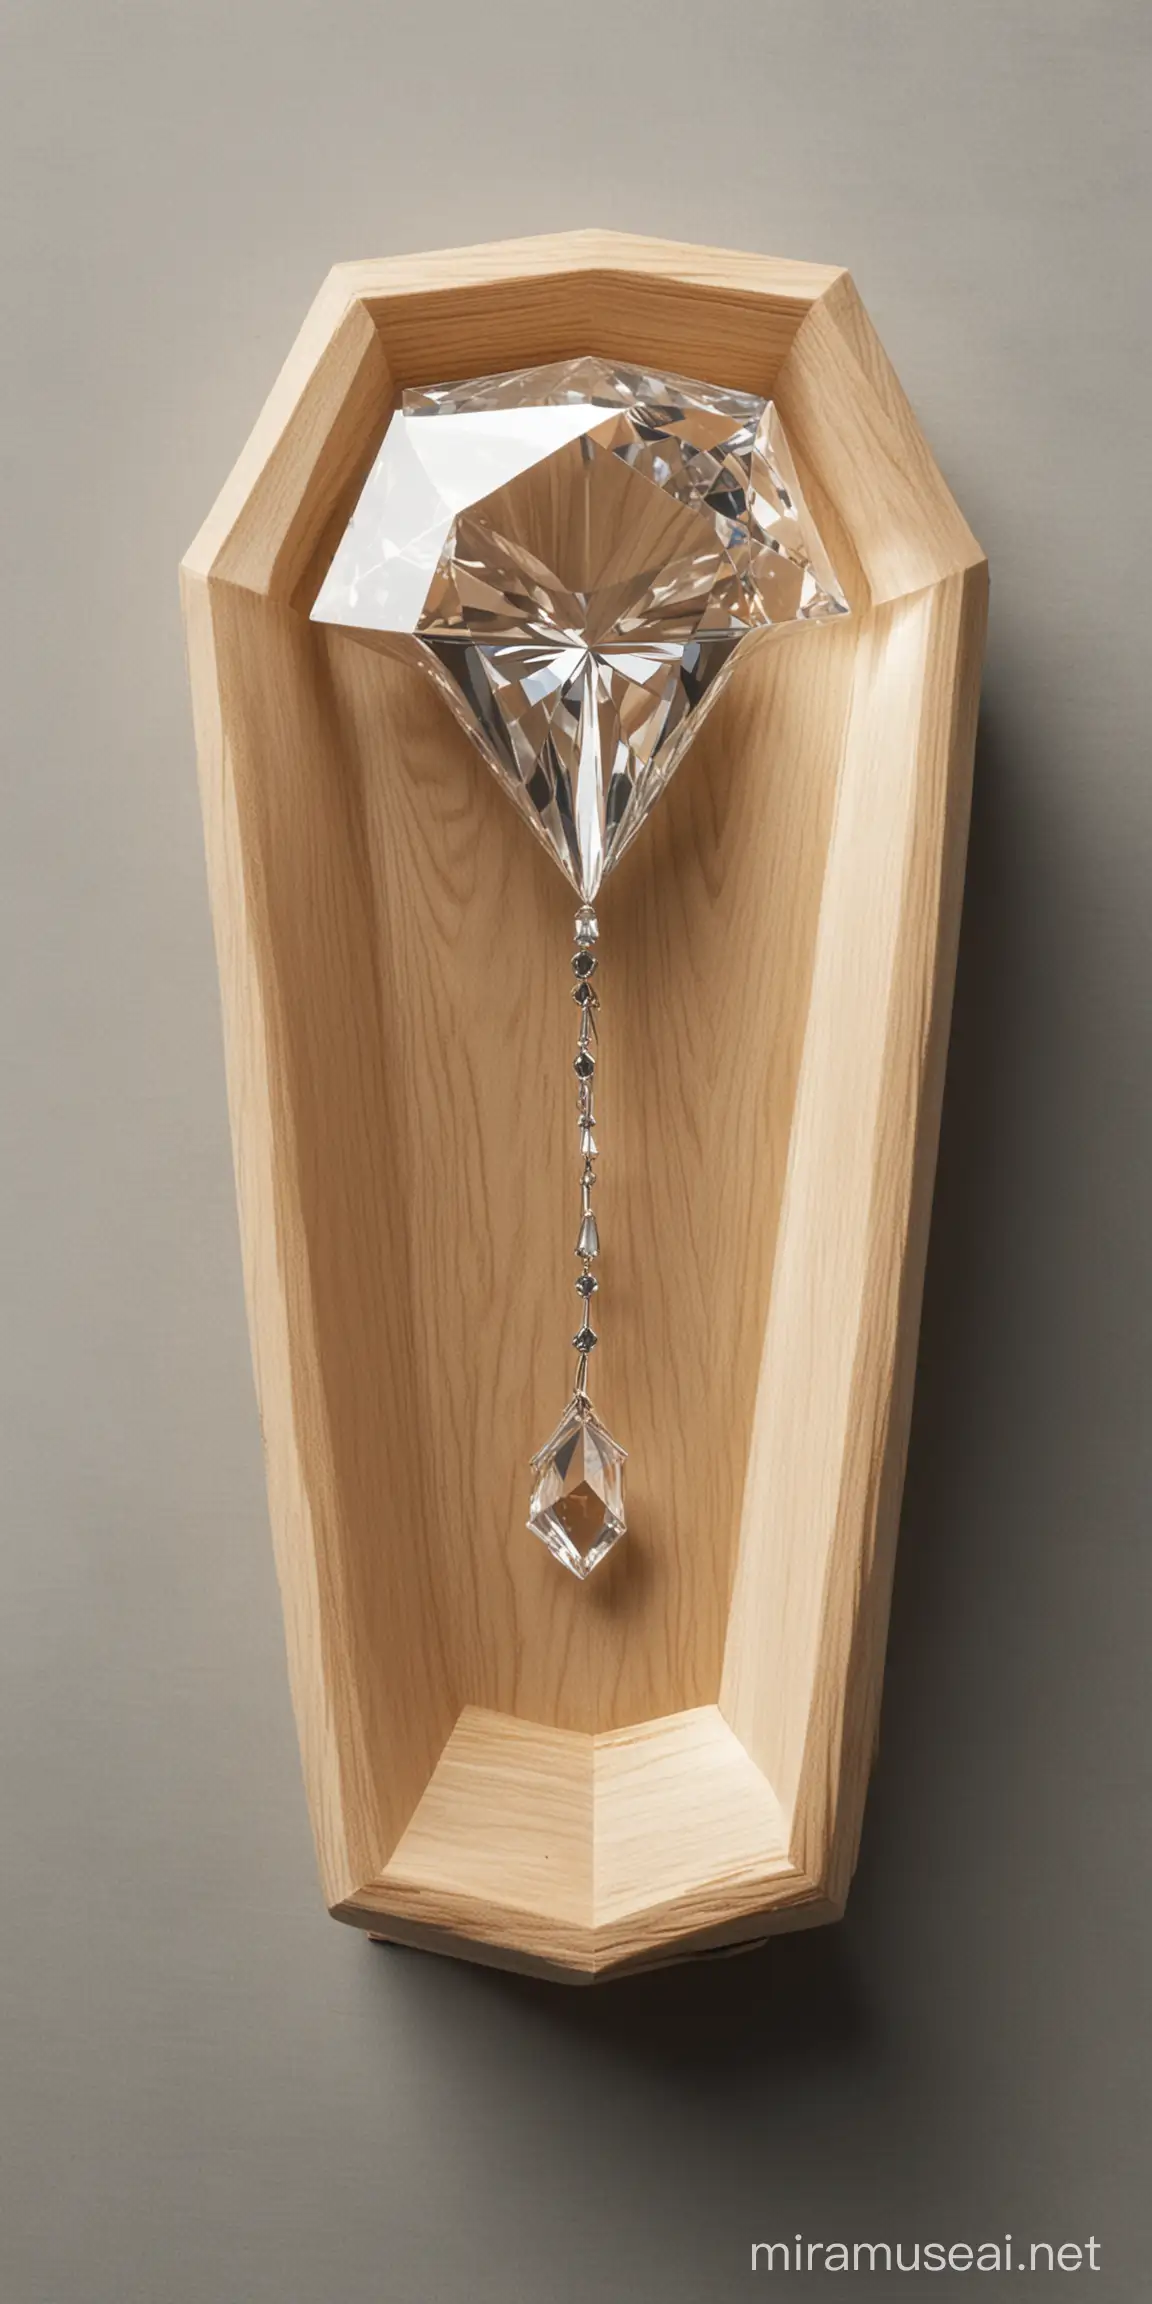 Luxurious Gemstone Coffin with Intricate Design